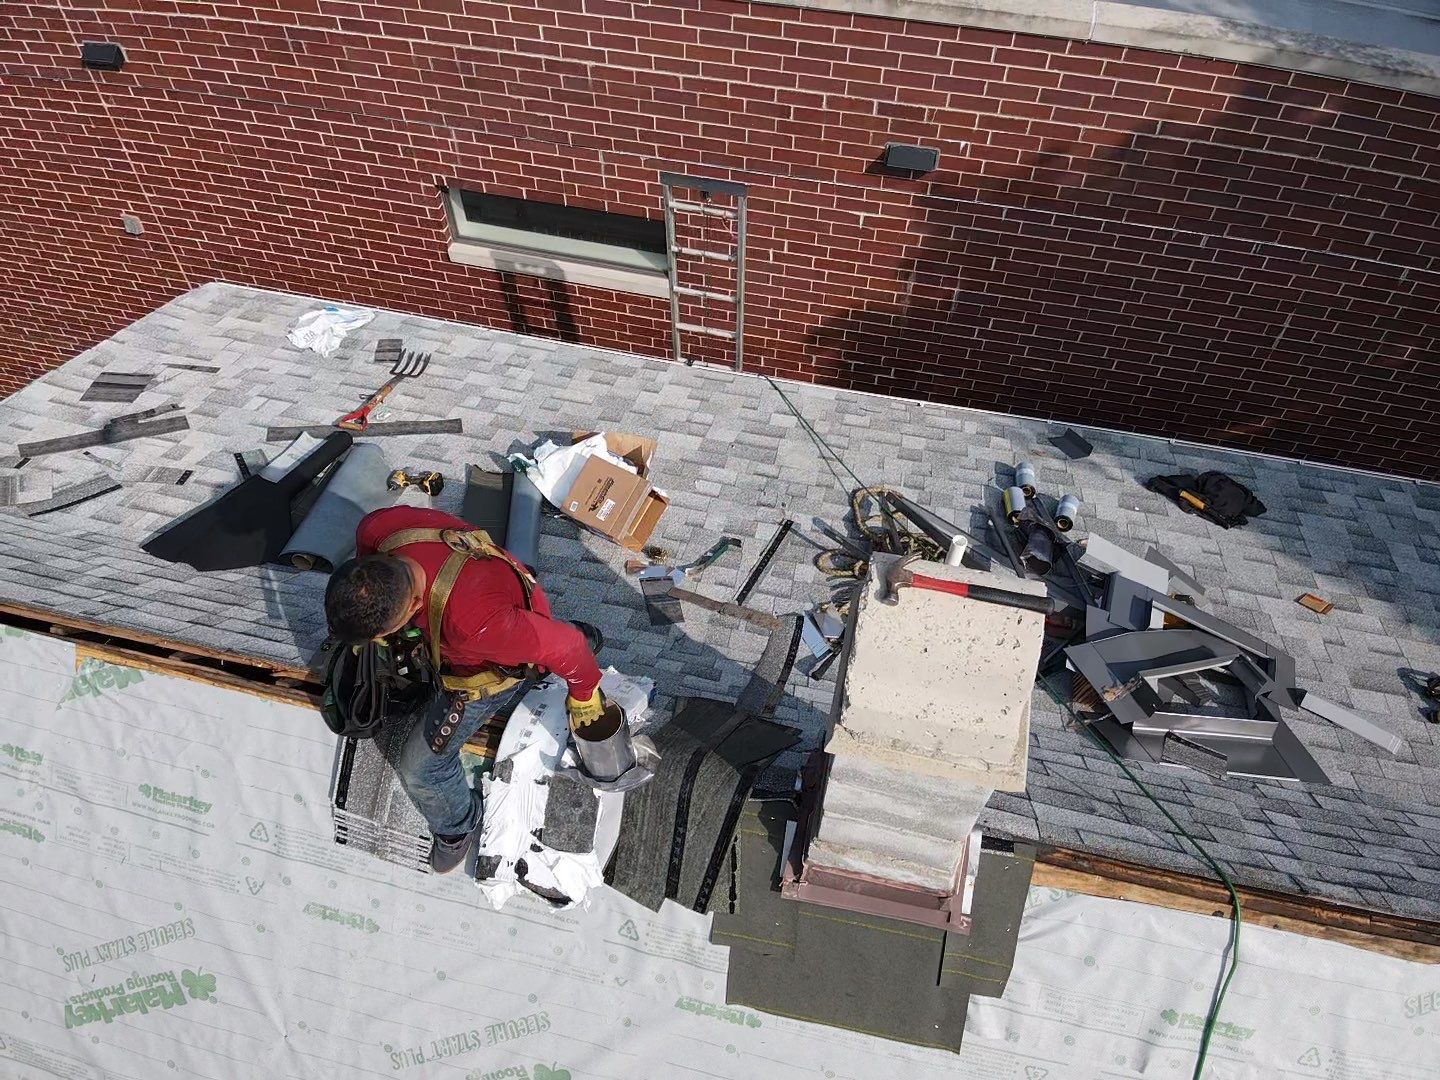 A man is working on the roof of a building.